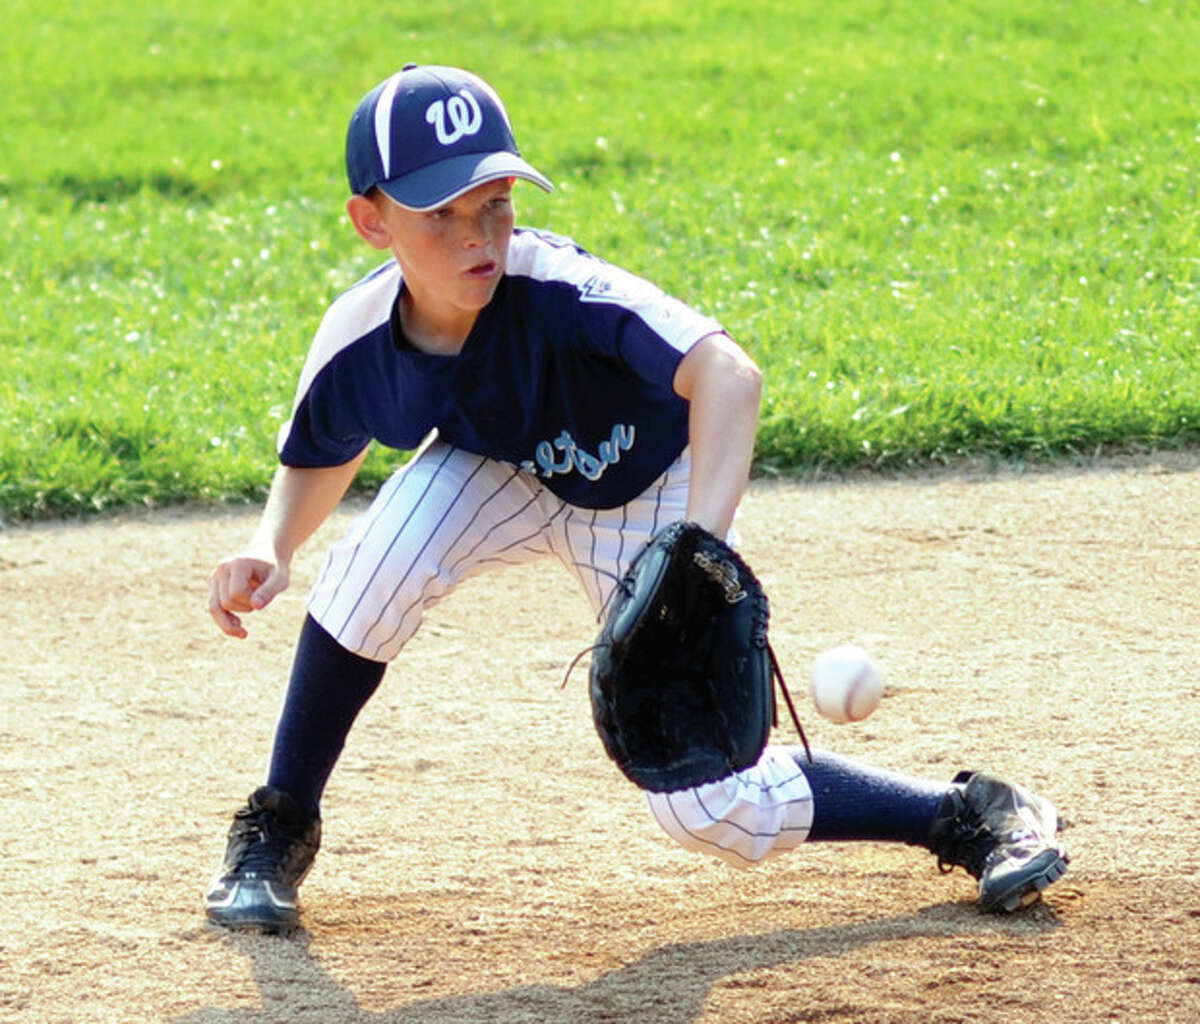 Hour Photo/John Nash Wilton?•s Zach Liston backhands a ground ball for an out during Wednesday's 10-year-old Little League pool play finale. Wilton beat Darien, 4-2.